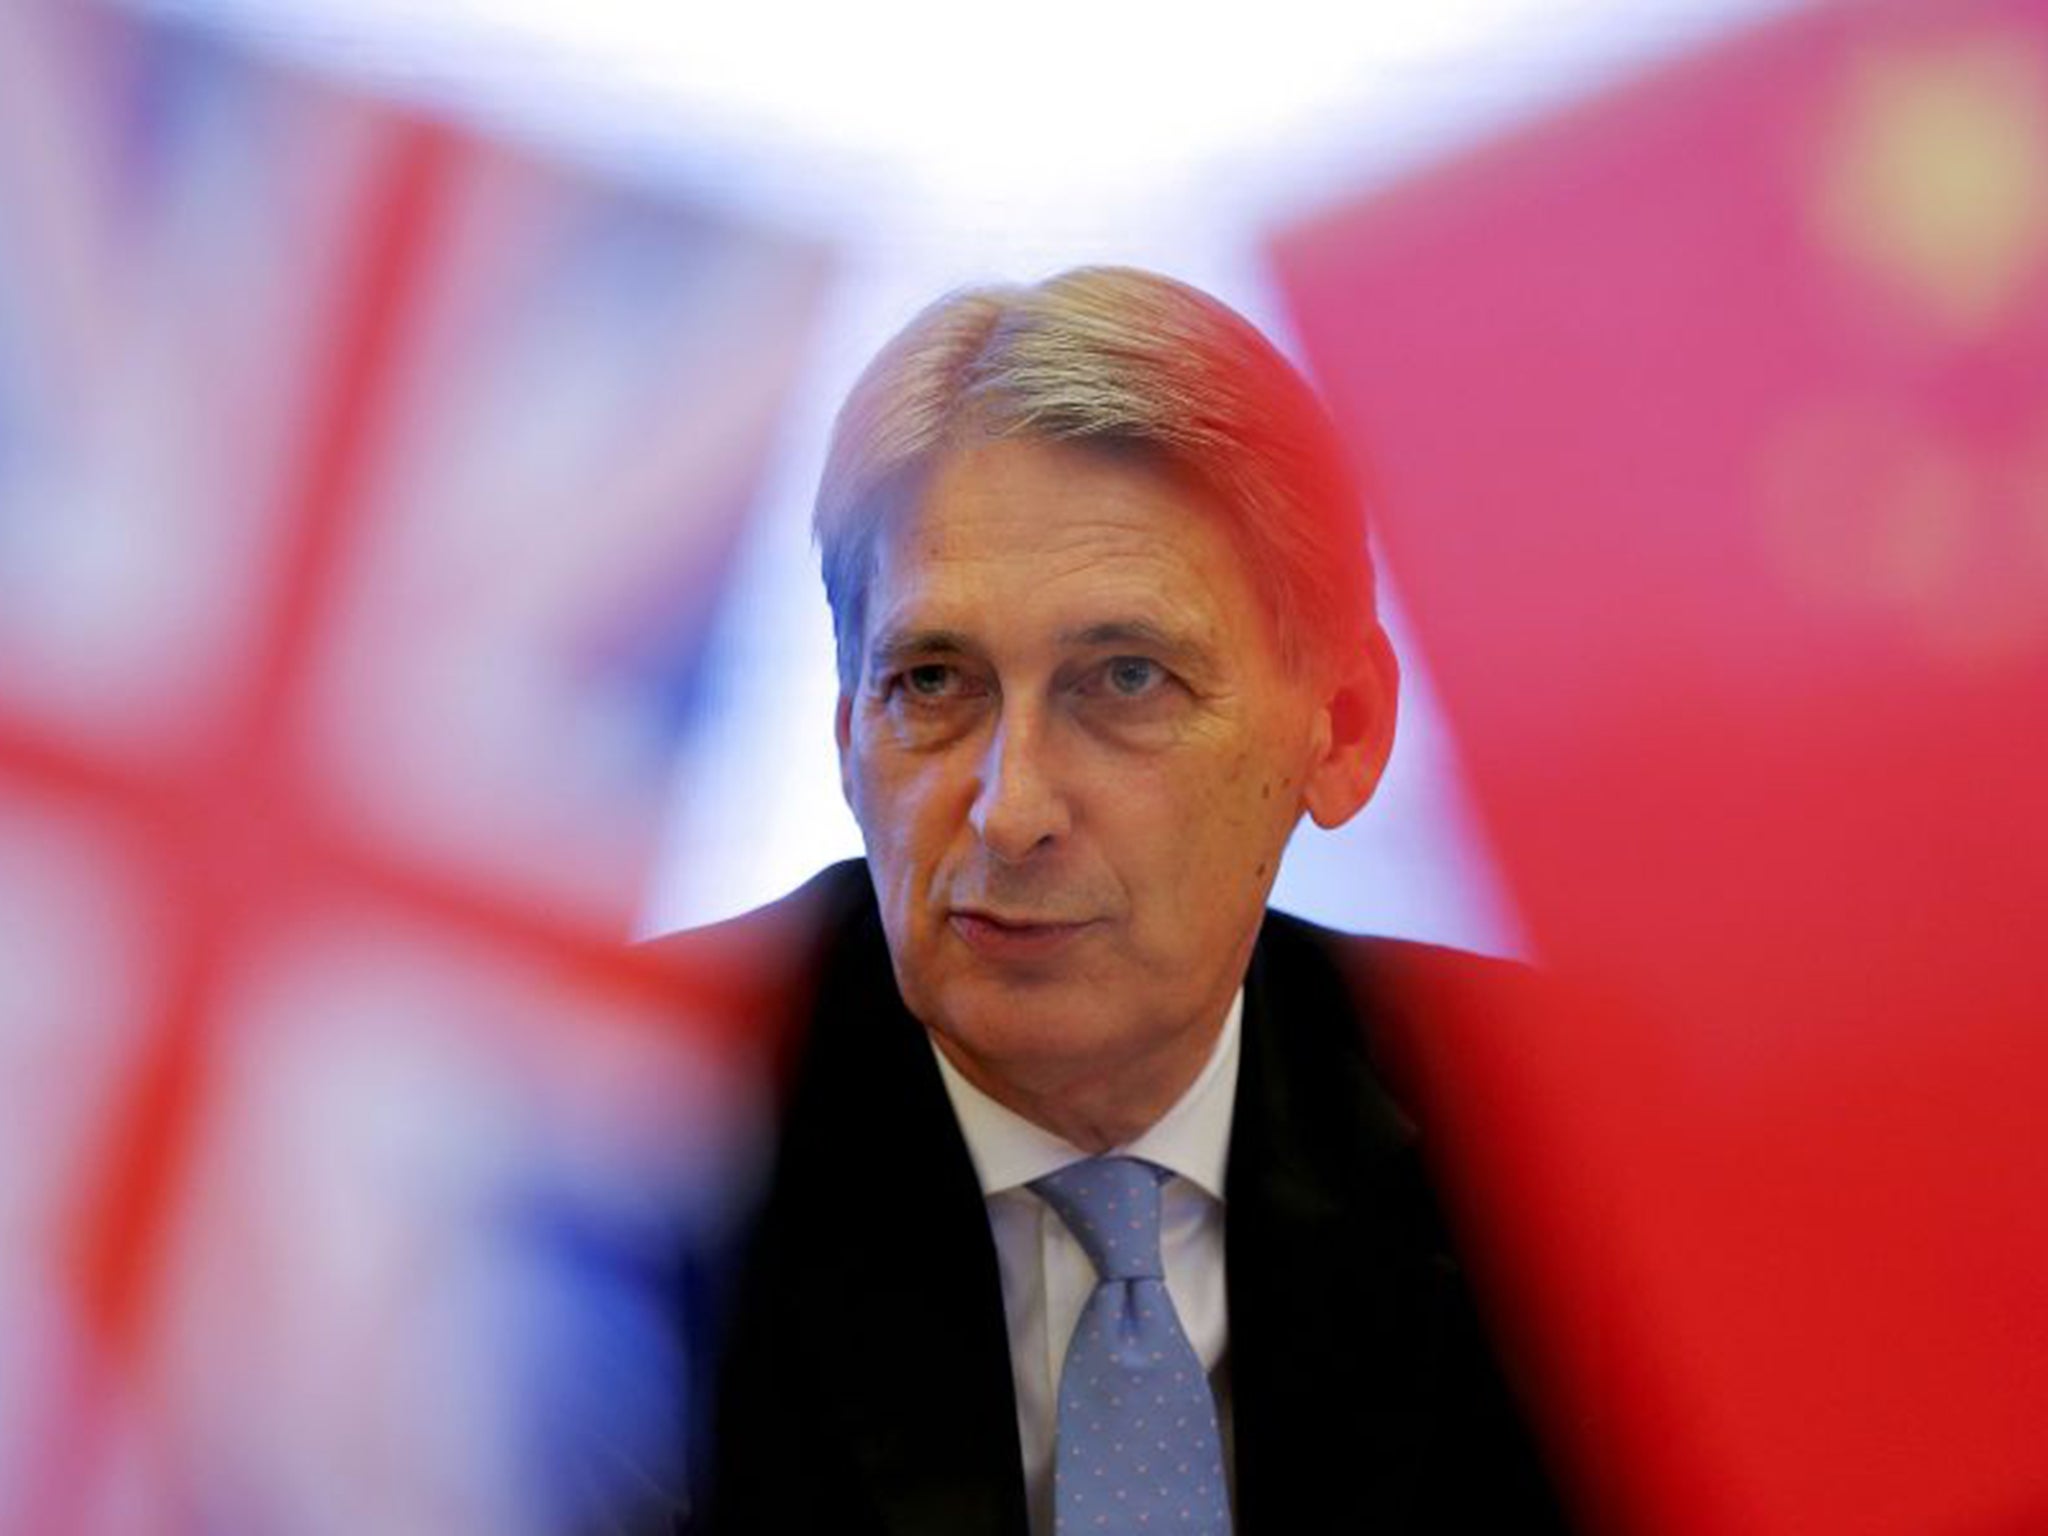 Philip Hammond attends a meeting last week at the Bank of China head office building in Beijing